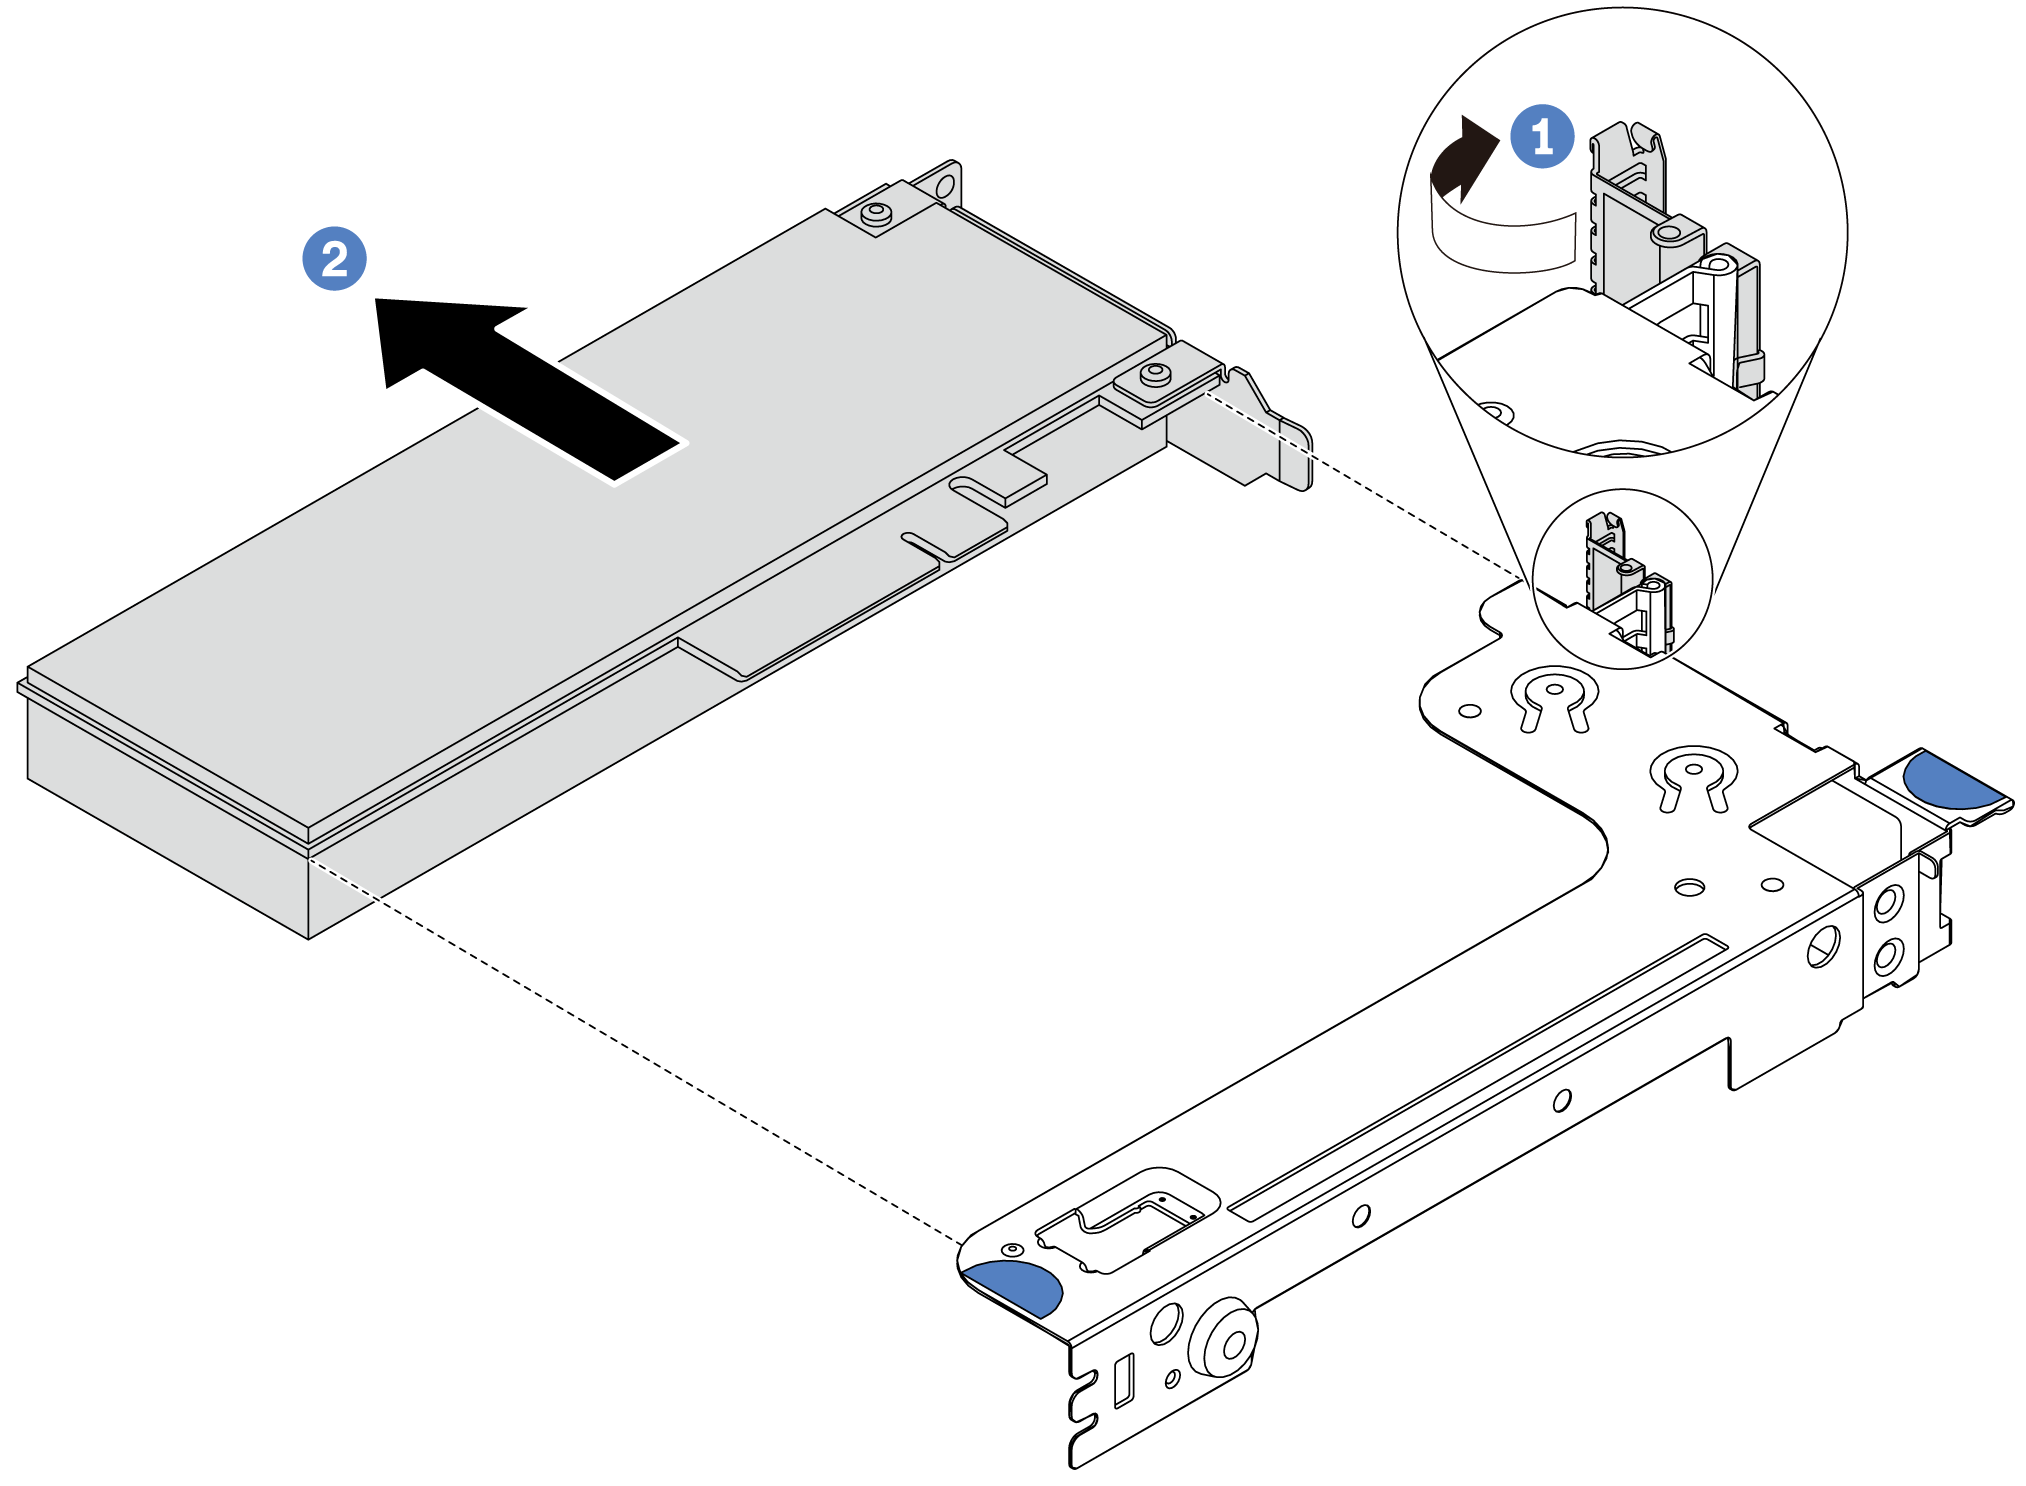 Remove PCIe adapters into riser 1 assembly with LP slot